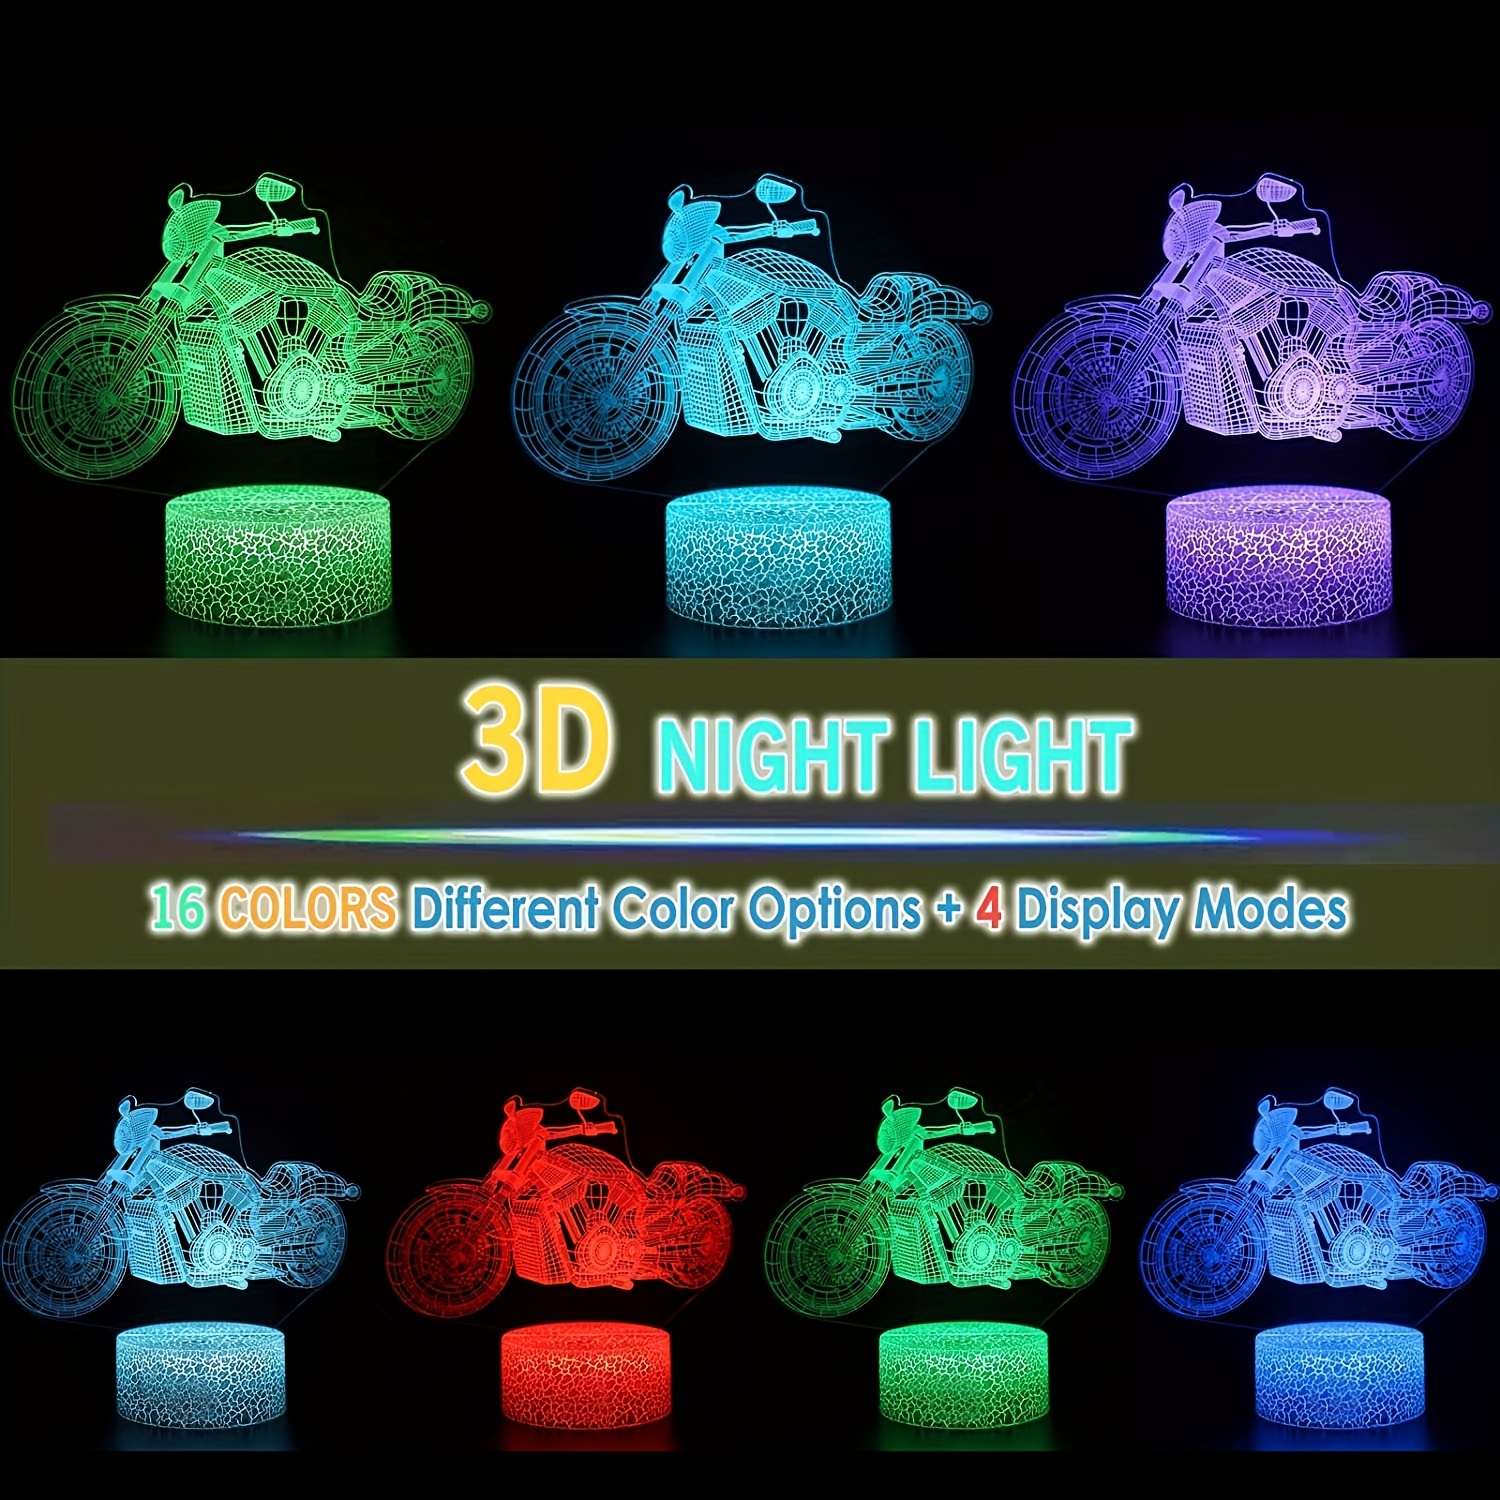 2-Pack 3D Night LED Light Base, LED Base for Acrylic 16 Colors LED Light  Base with Remote Control and USB Cable for Bedroom Child Room Restaurant  Shop